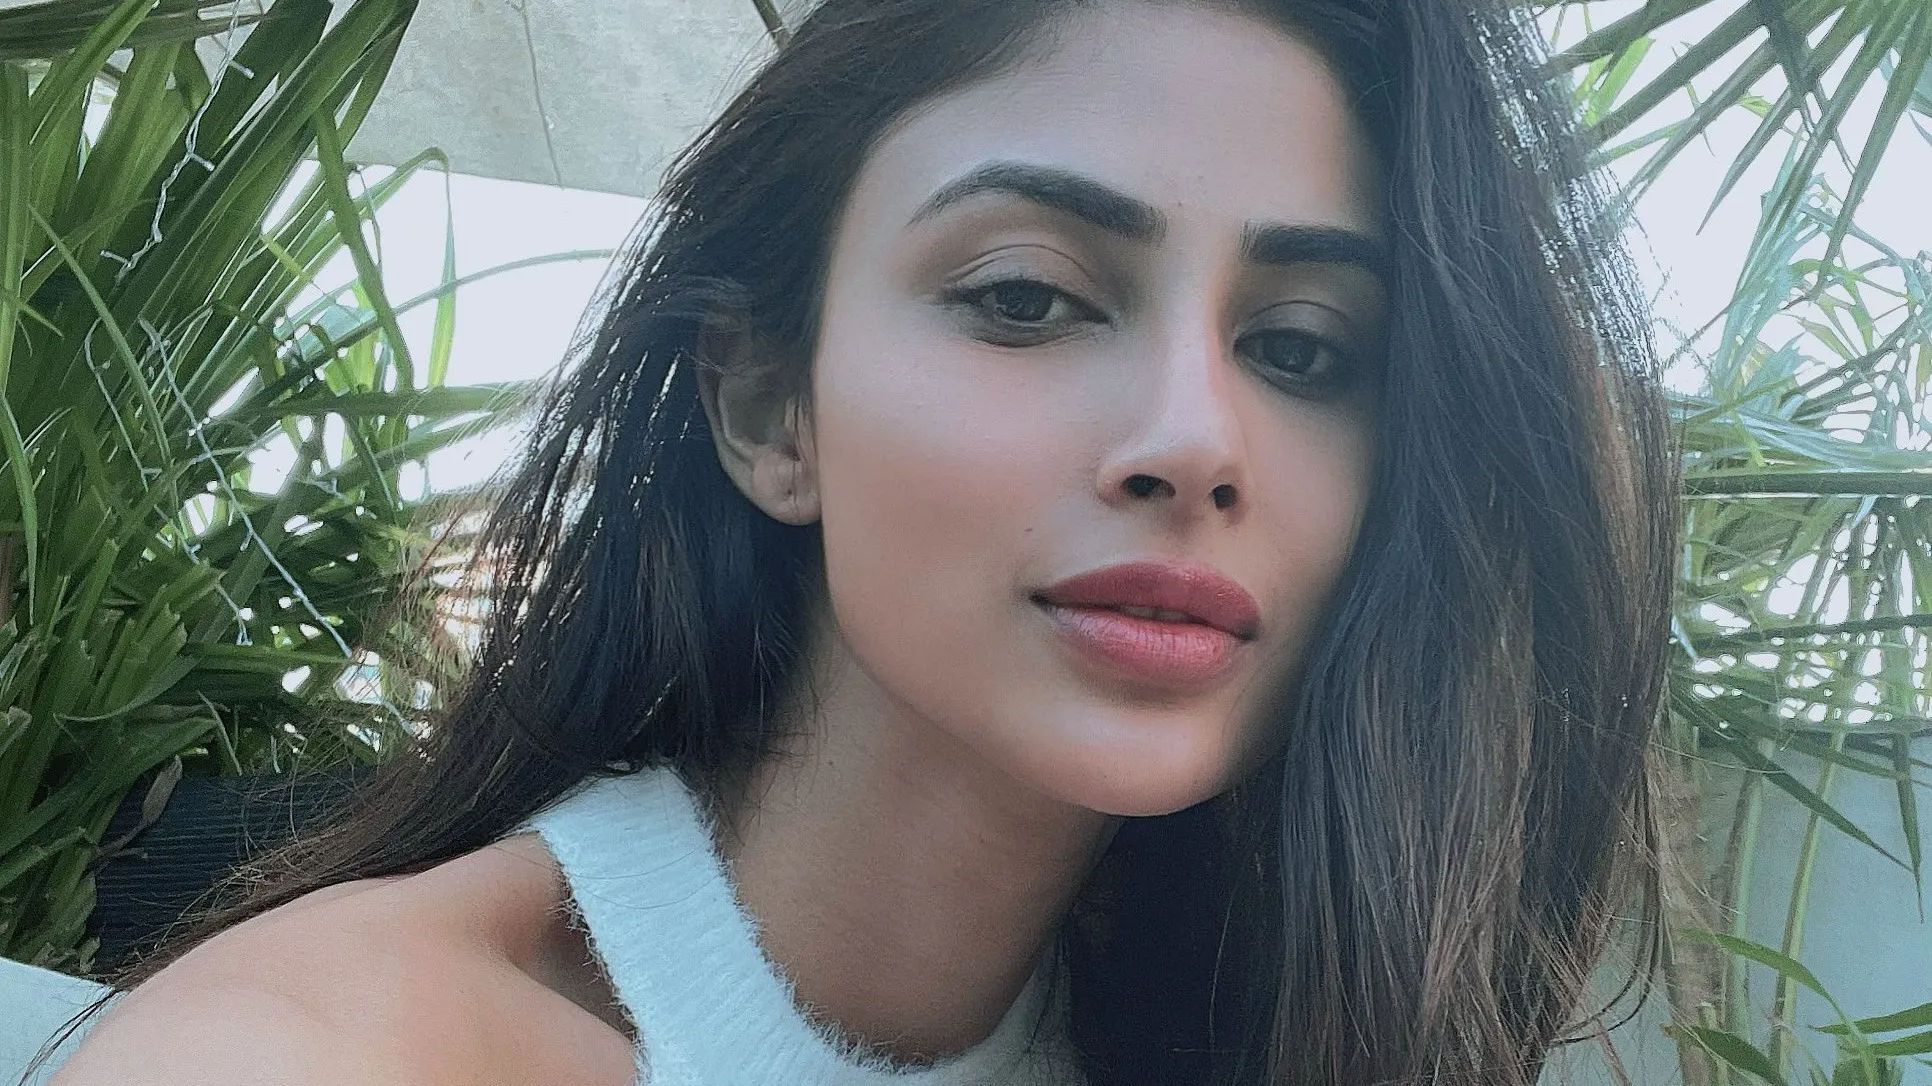 NSE shares Mouni Roy’s pictures from Twitter handle, deletes post and calls it ‘human error’